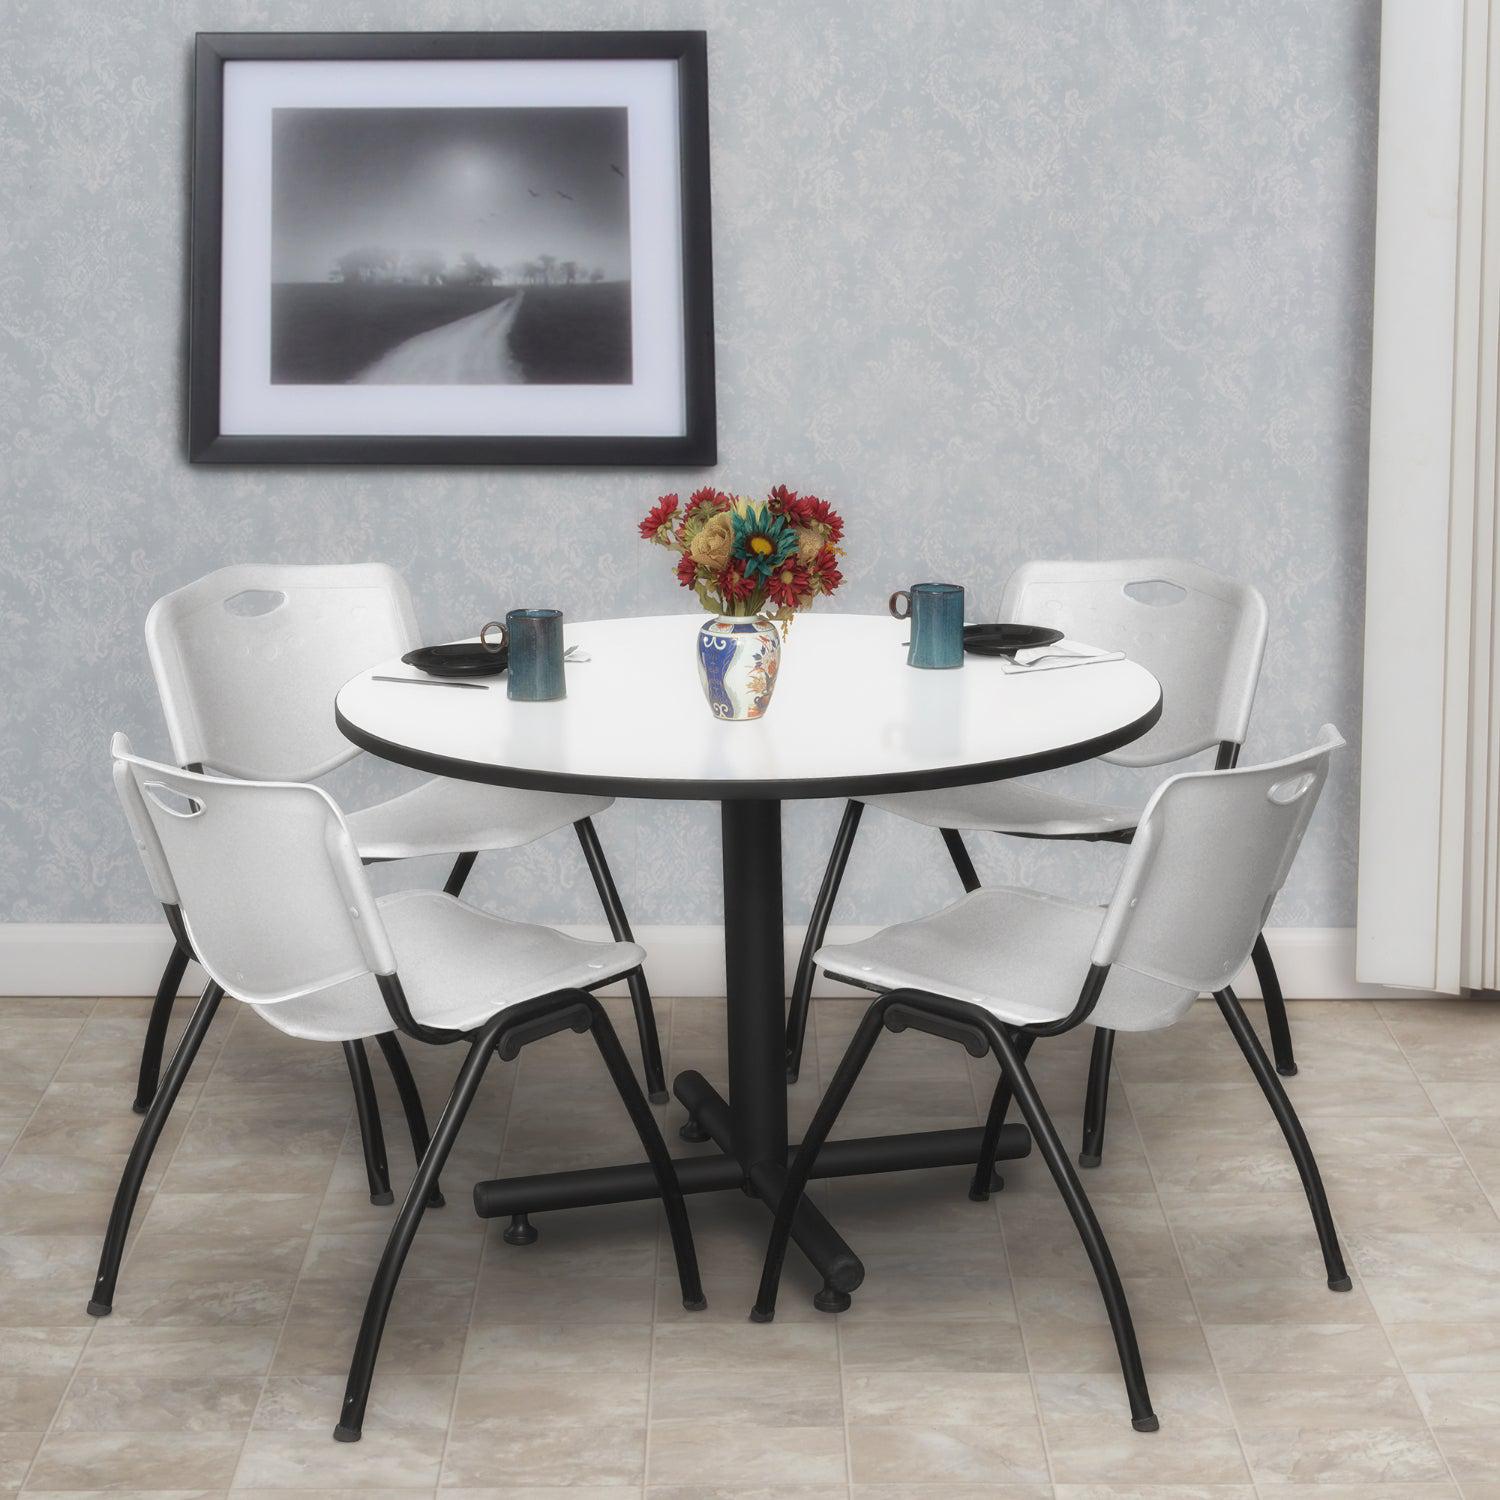 Kobe Round Breakroom Table and Chair Package, Kobe 48" Round X-Base Breakroom Table with 4 "M" Stack Chairs